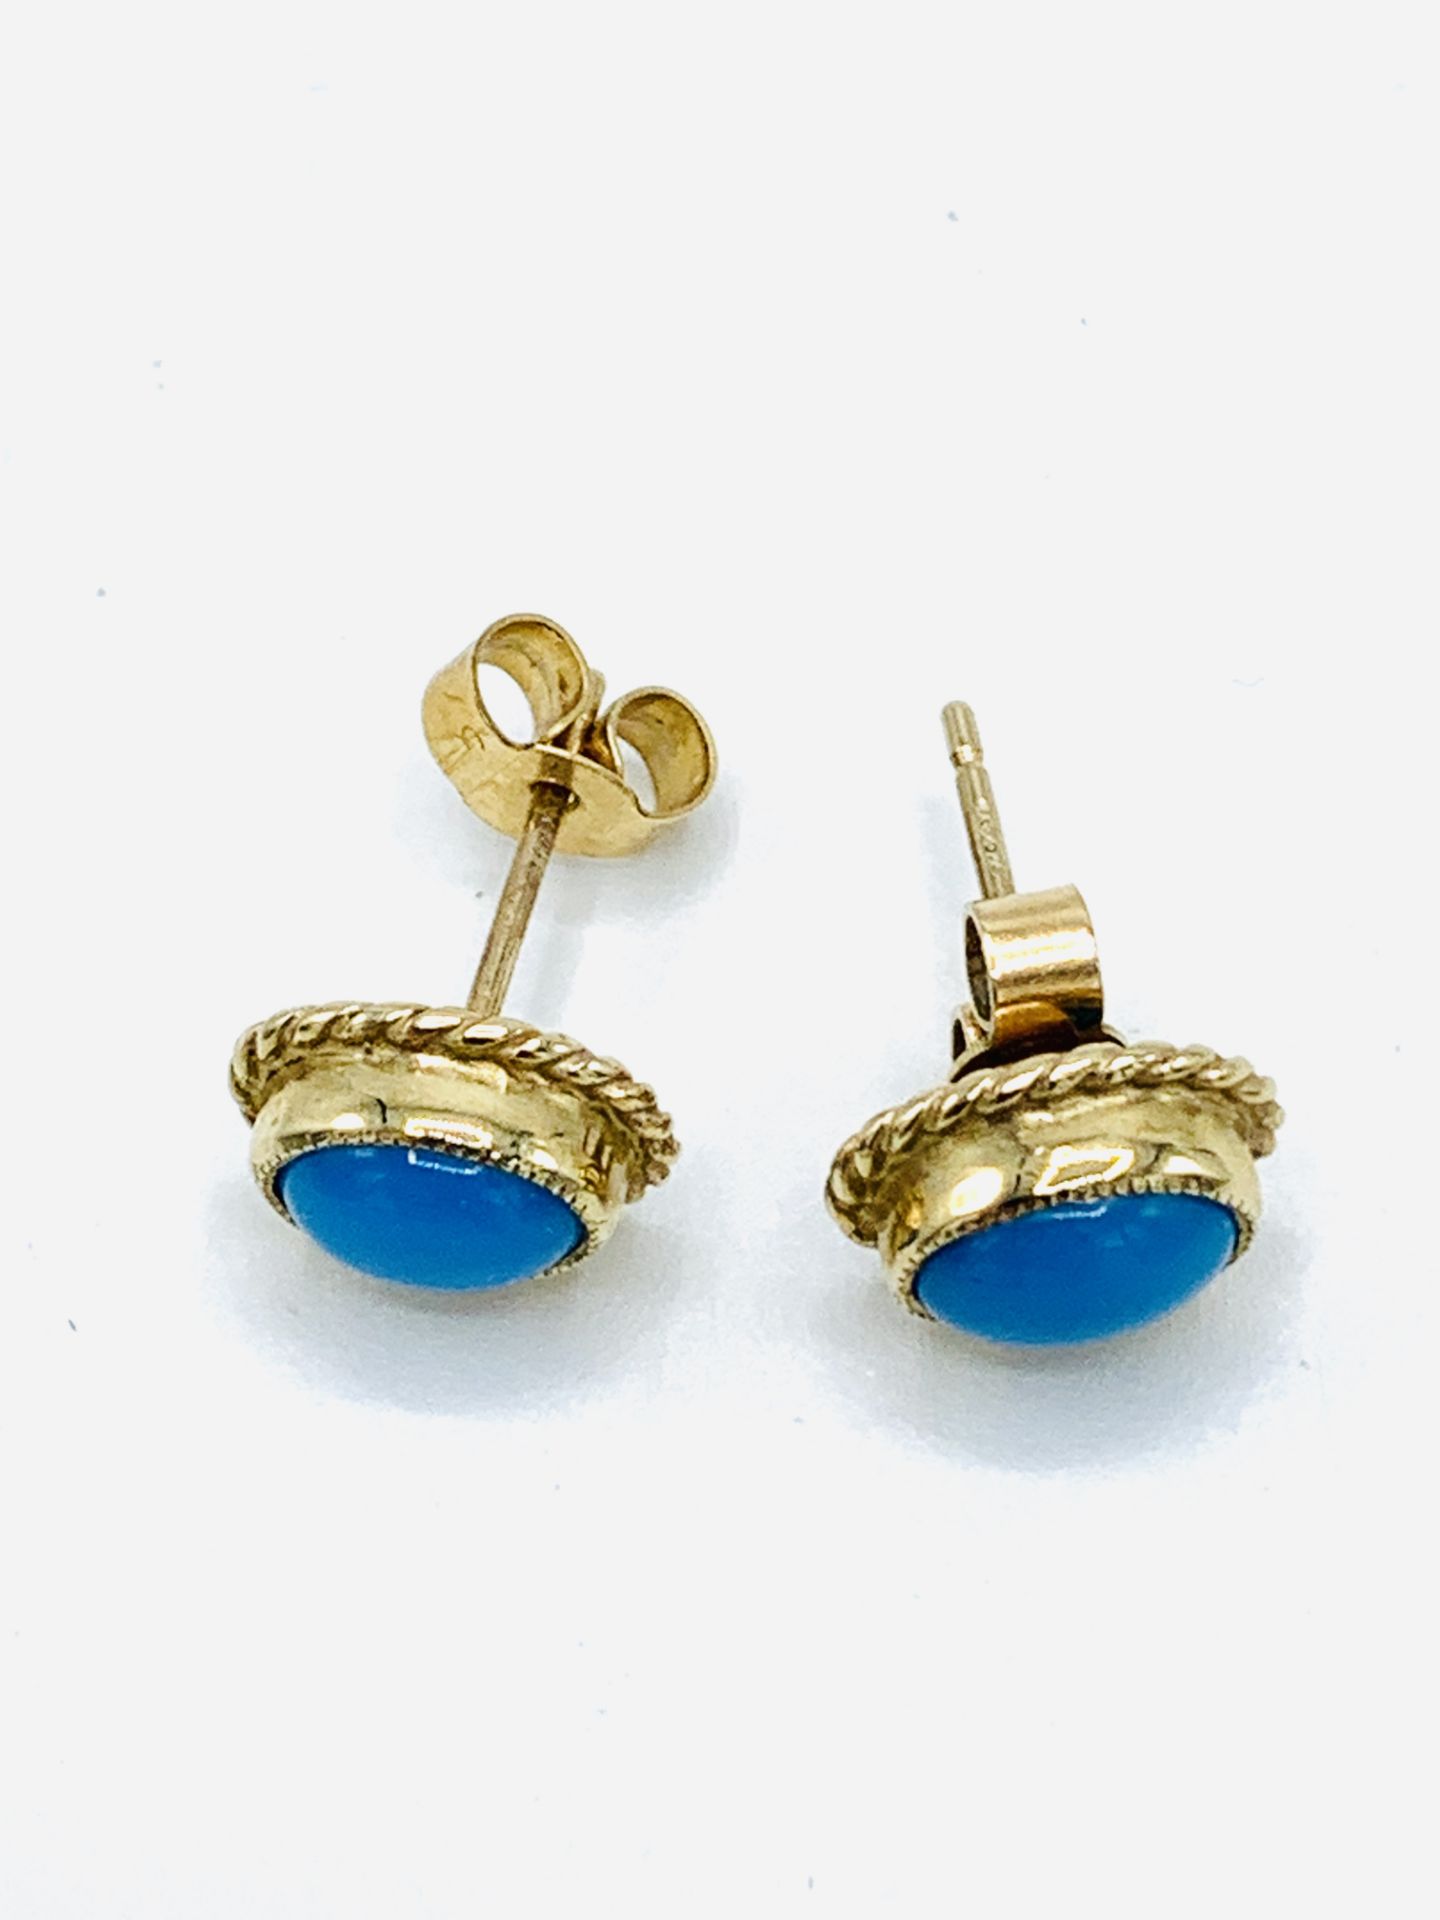 Gold coloured earrings with turquoise centre stone. Estimate £10-20. - Image 2 of 2